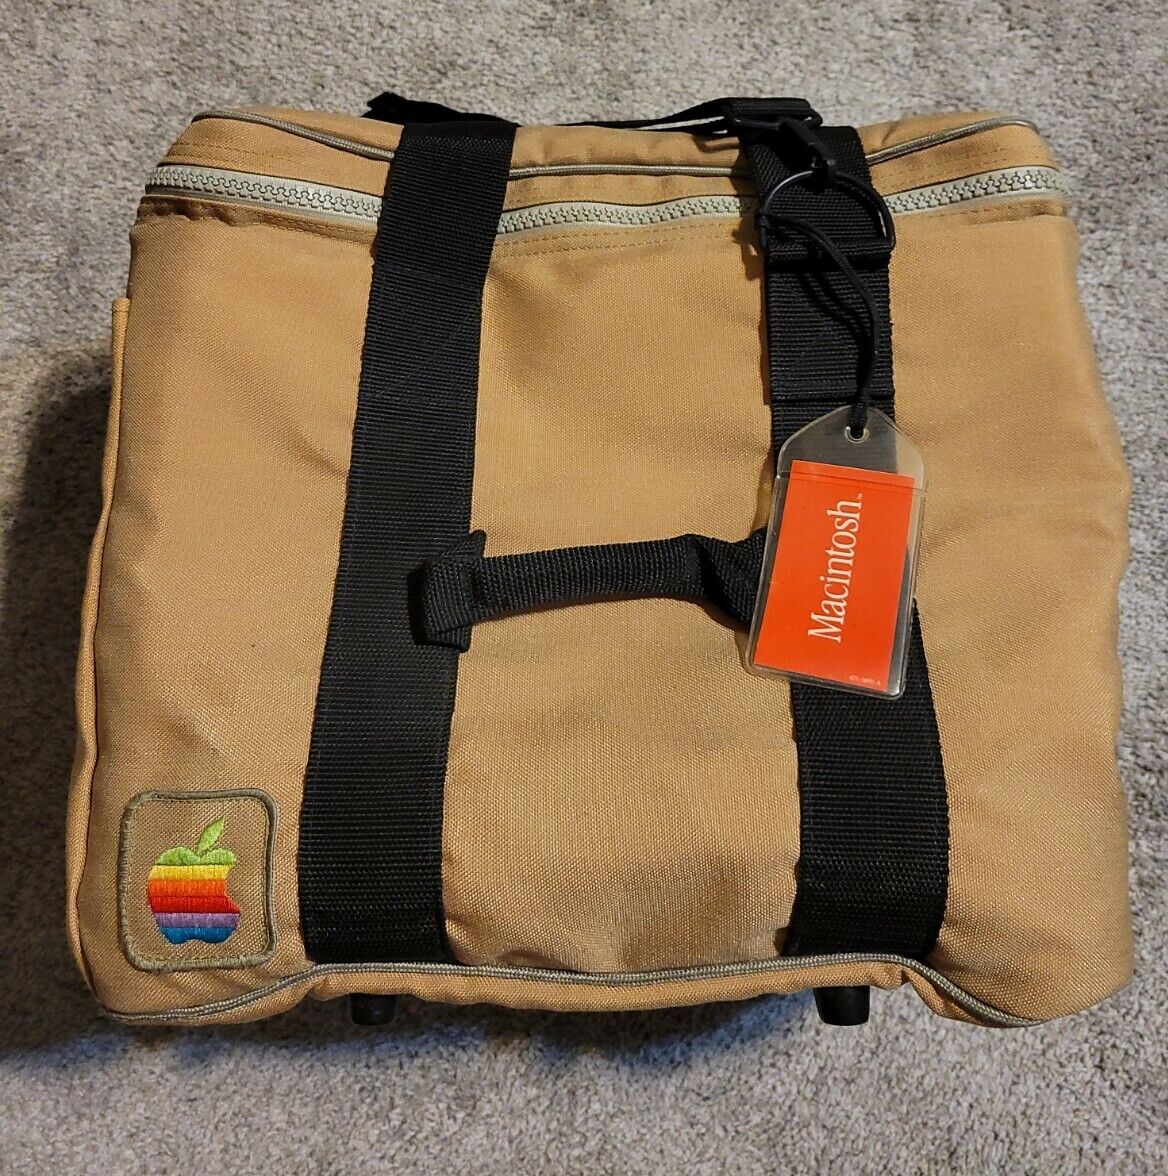 Vintage Apple Macintosh Computer Travel Bag Tote Carry Case with strap